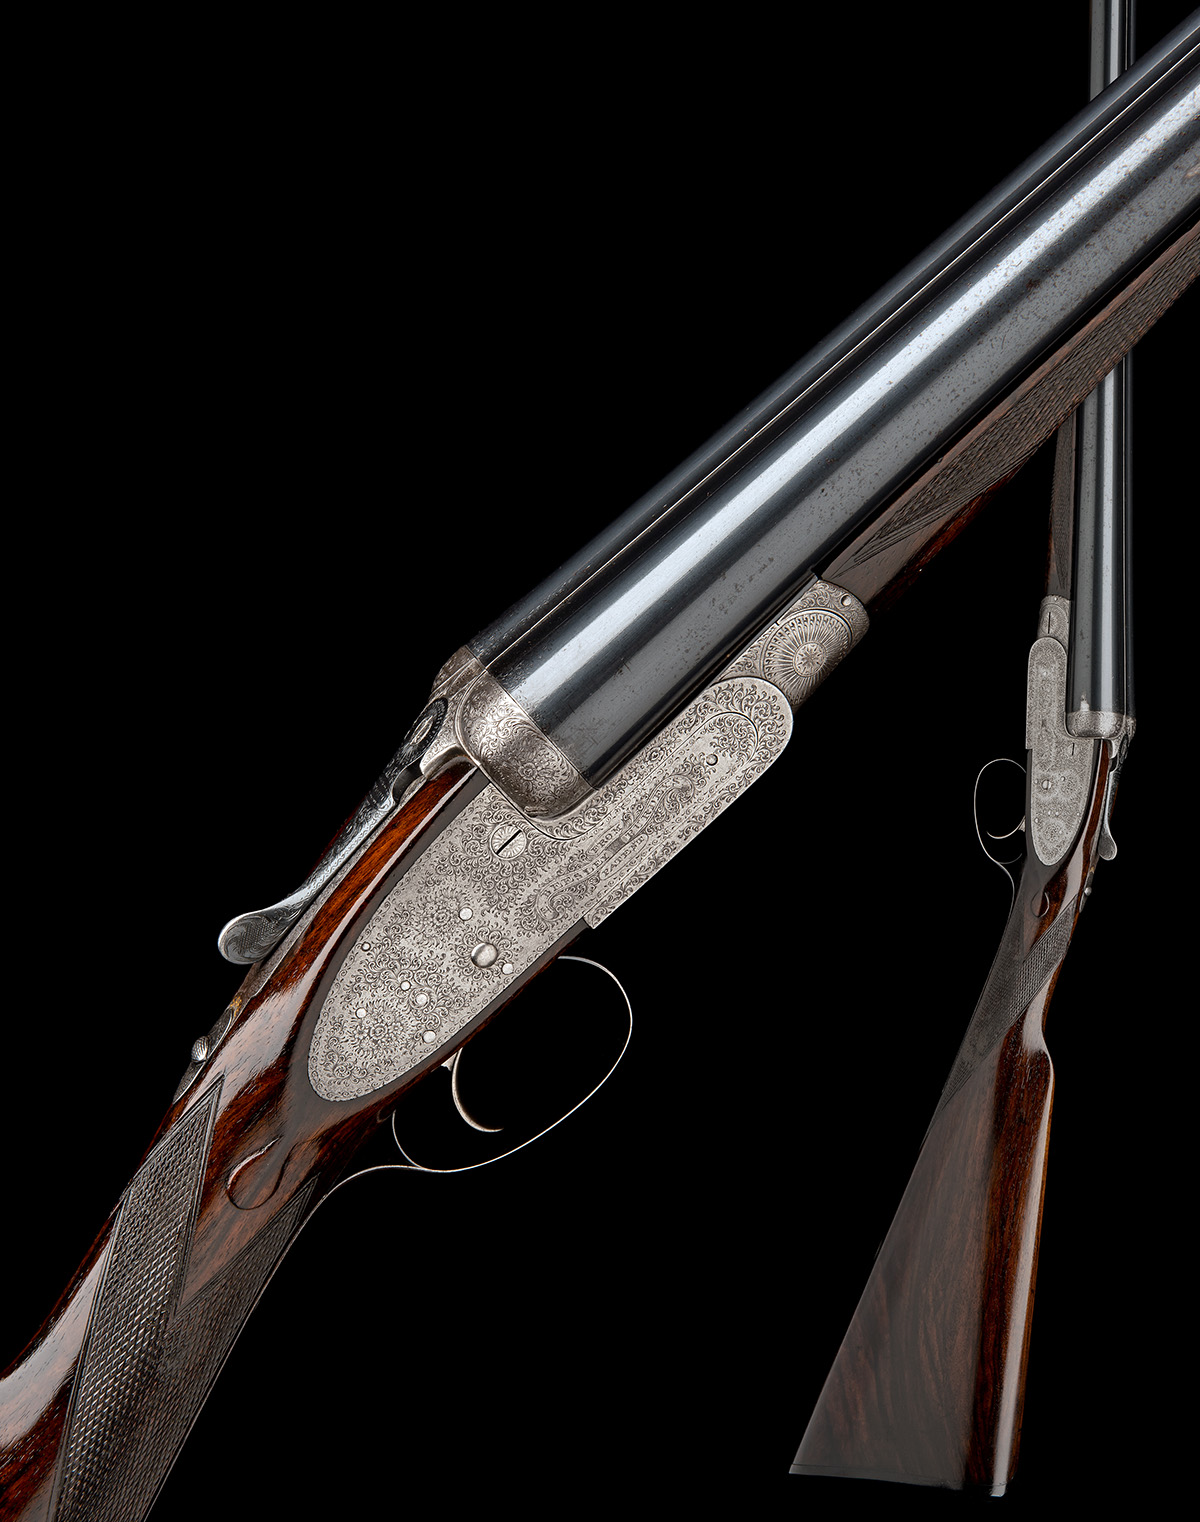 F. BEESLEY (FROM PURDEY'S) A 12-BORE GREEN PATENT SINGLE-TRIGGER SELF-OPENING SIDELOCK EJECTOR, - Image 6 of 6